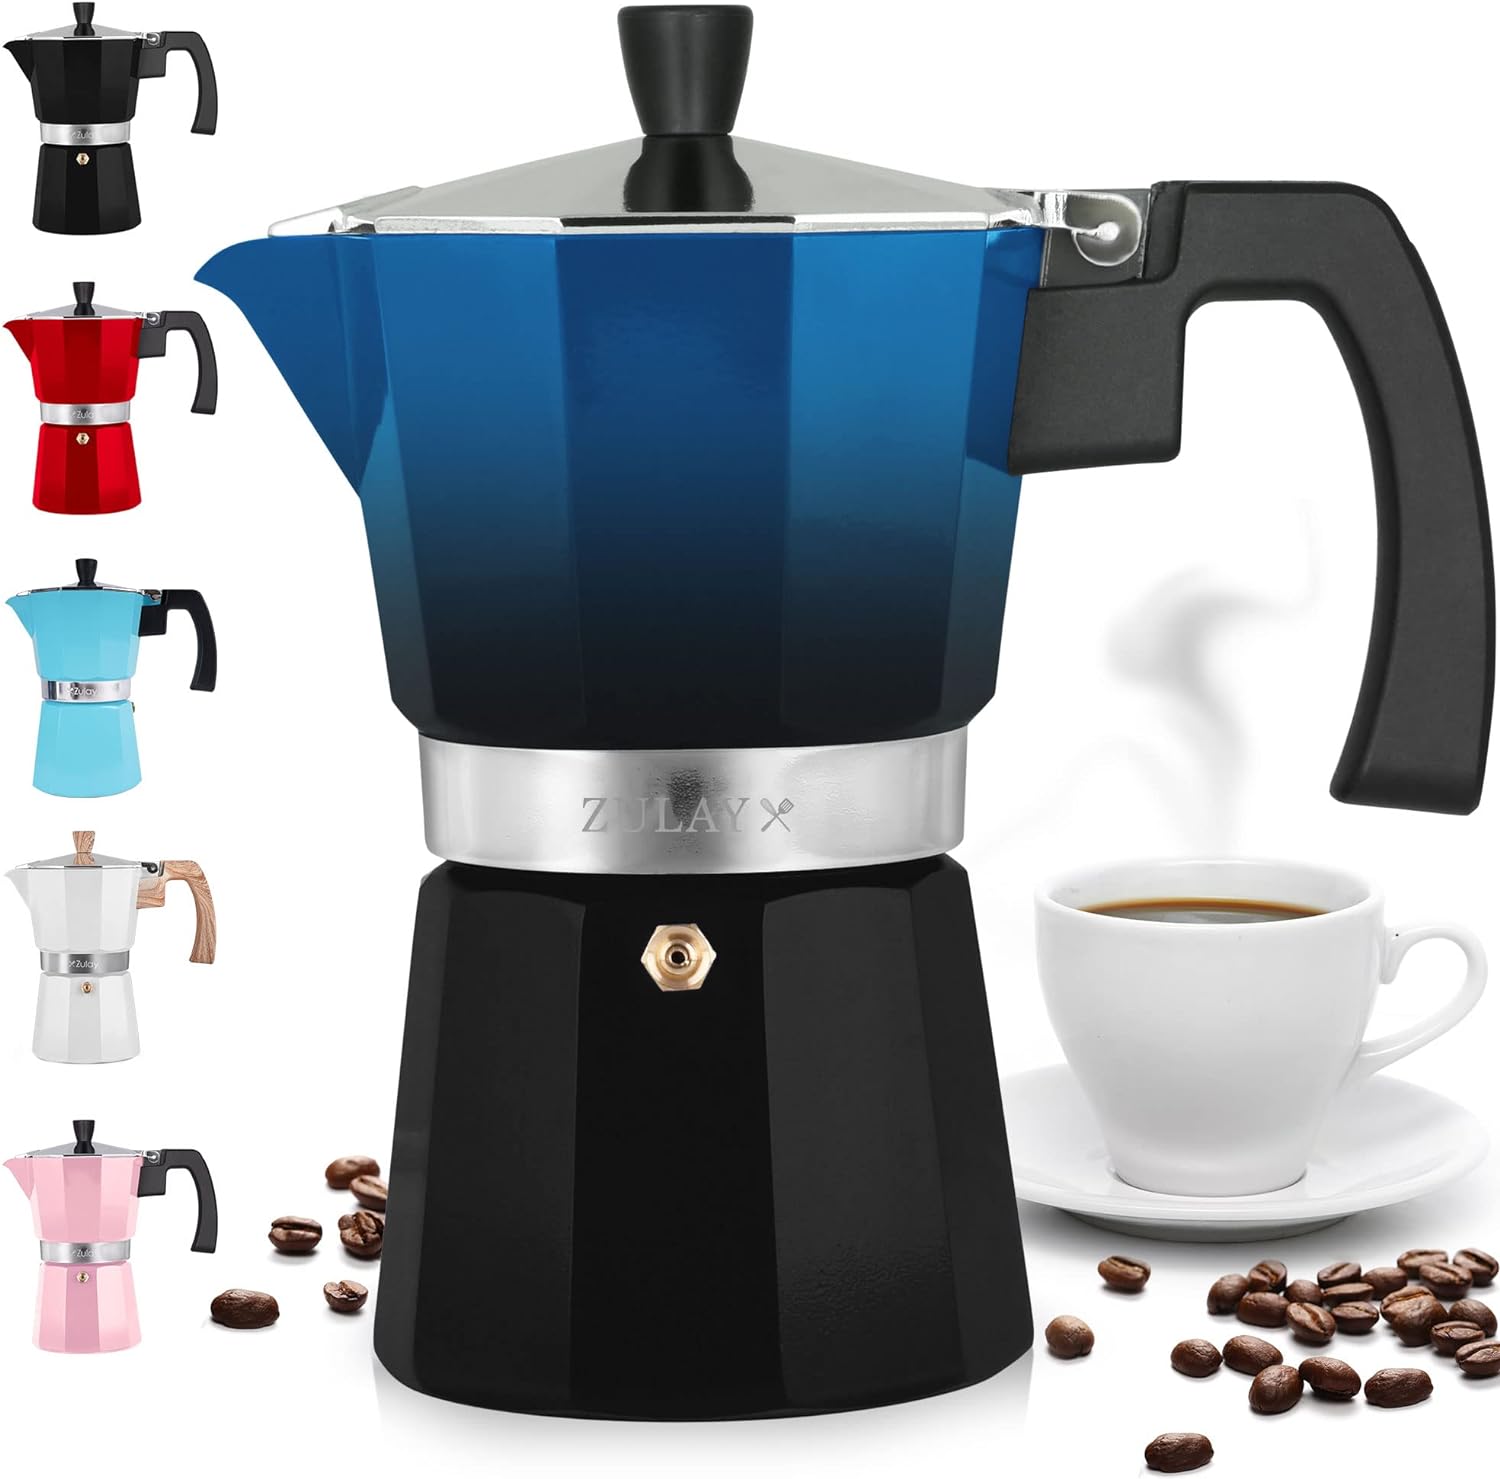 Zulay Classic Stovetop Espresso Maker for Great Flavored Strong Espresso, Classic Italian Style 3 Espresso Cup Moka Pot, Makes Delicious Coffee, Easy to Operate  Quick Cleanup Pot (Blue/Black)